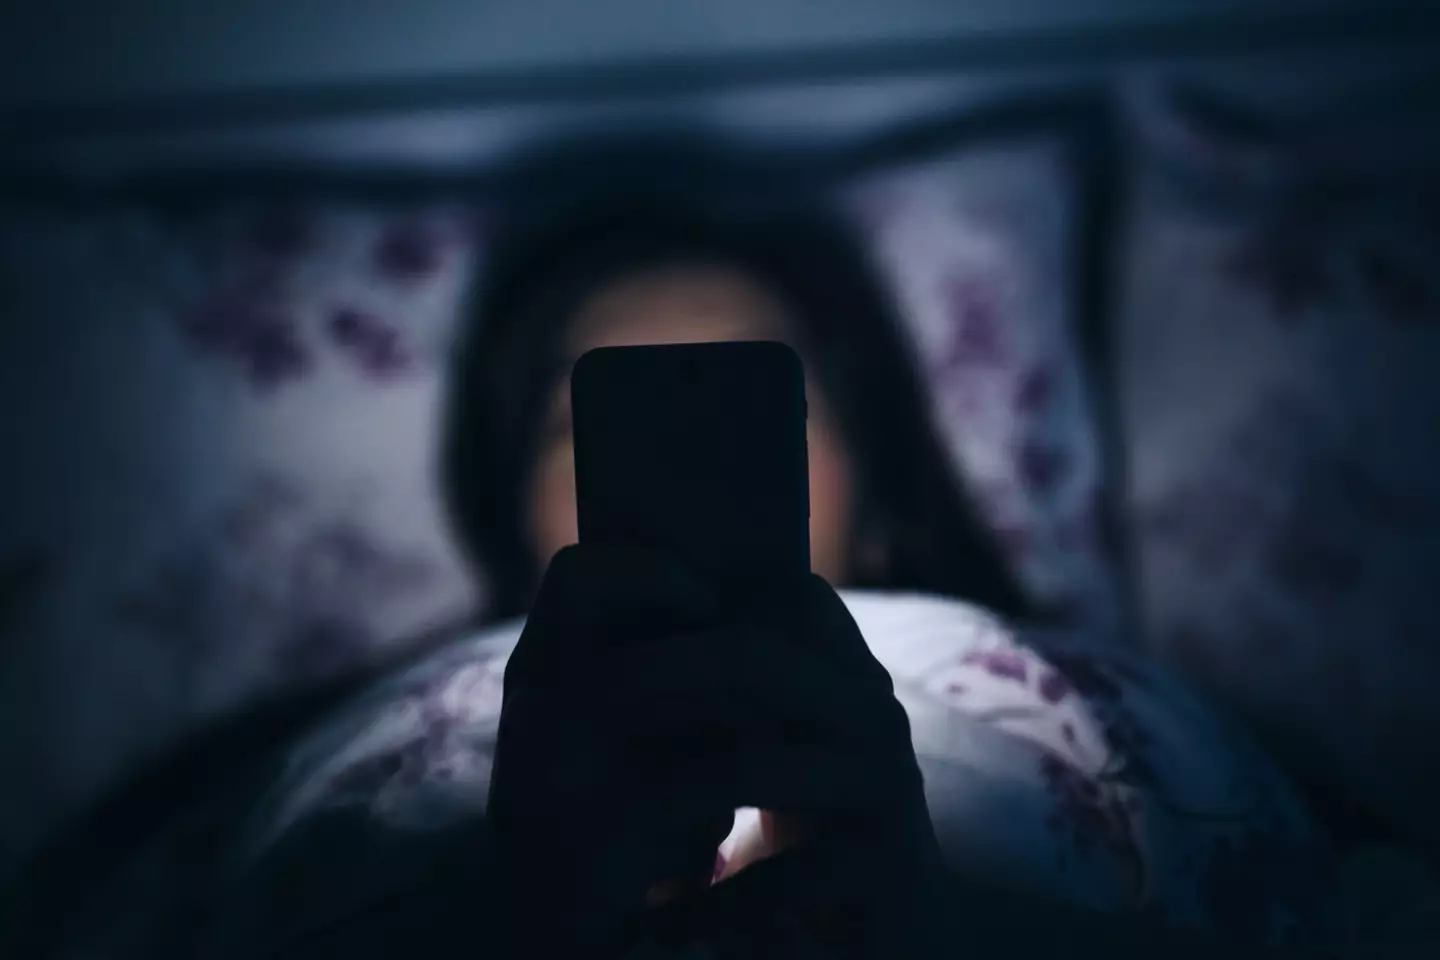 Scrolling in the night is one of the worst things we can do.